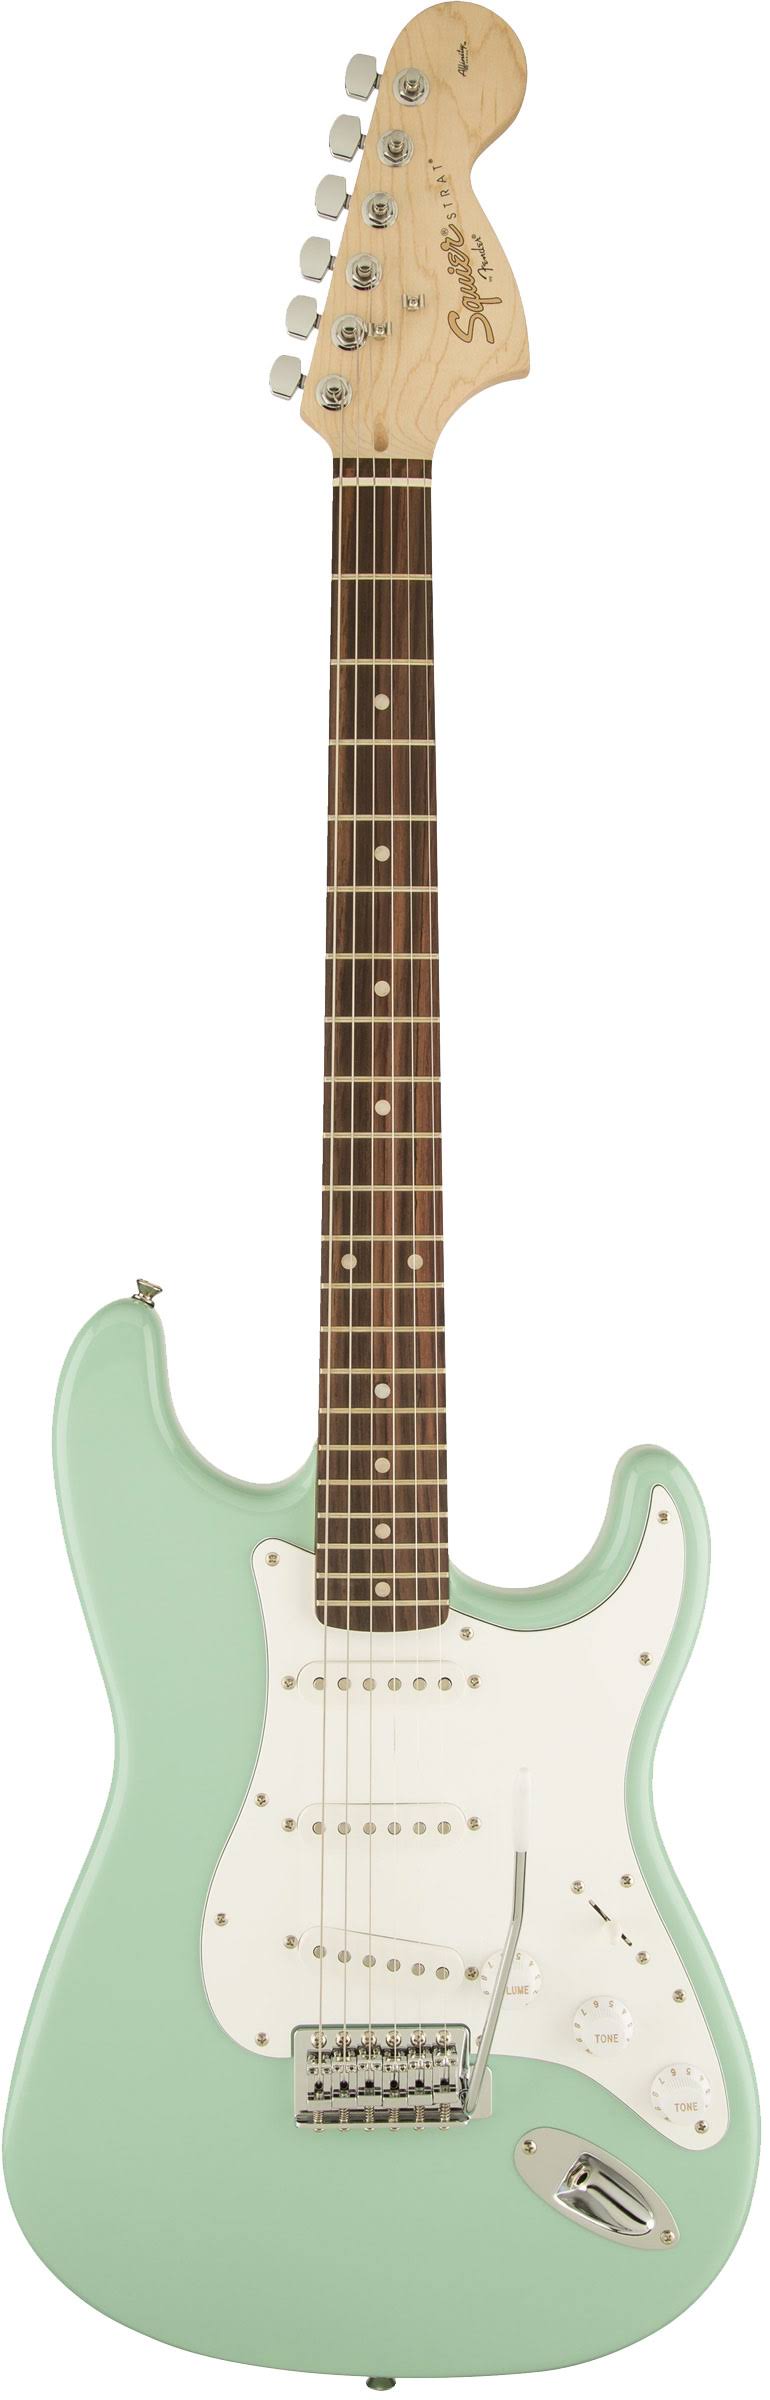 Squier 0370600557 Affinity Strat Stratocaster Electric Guitar - Surf Green